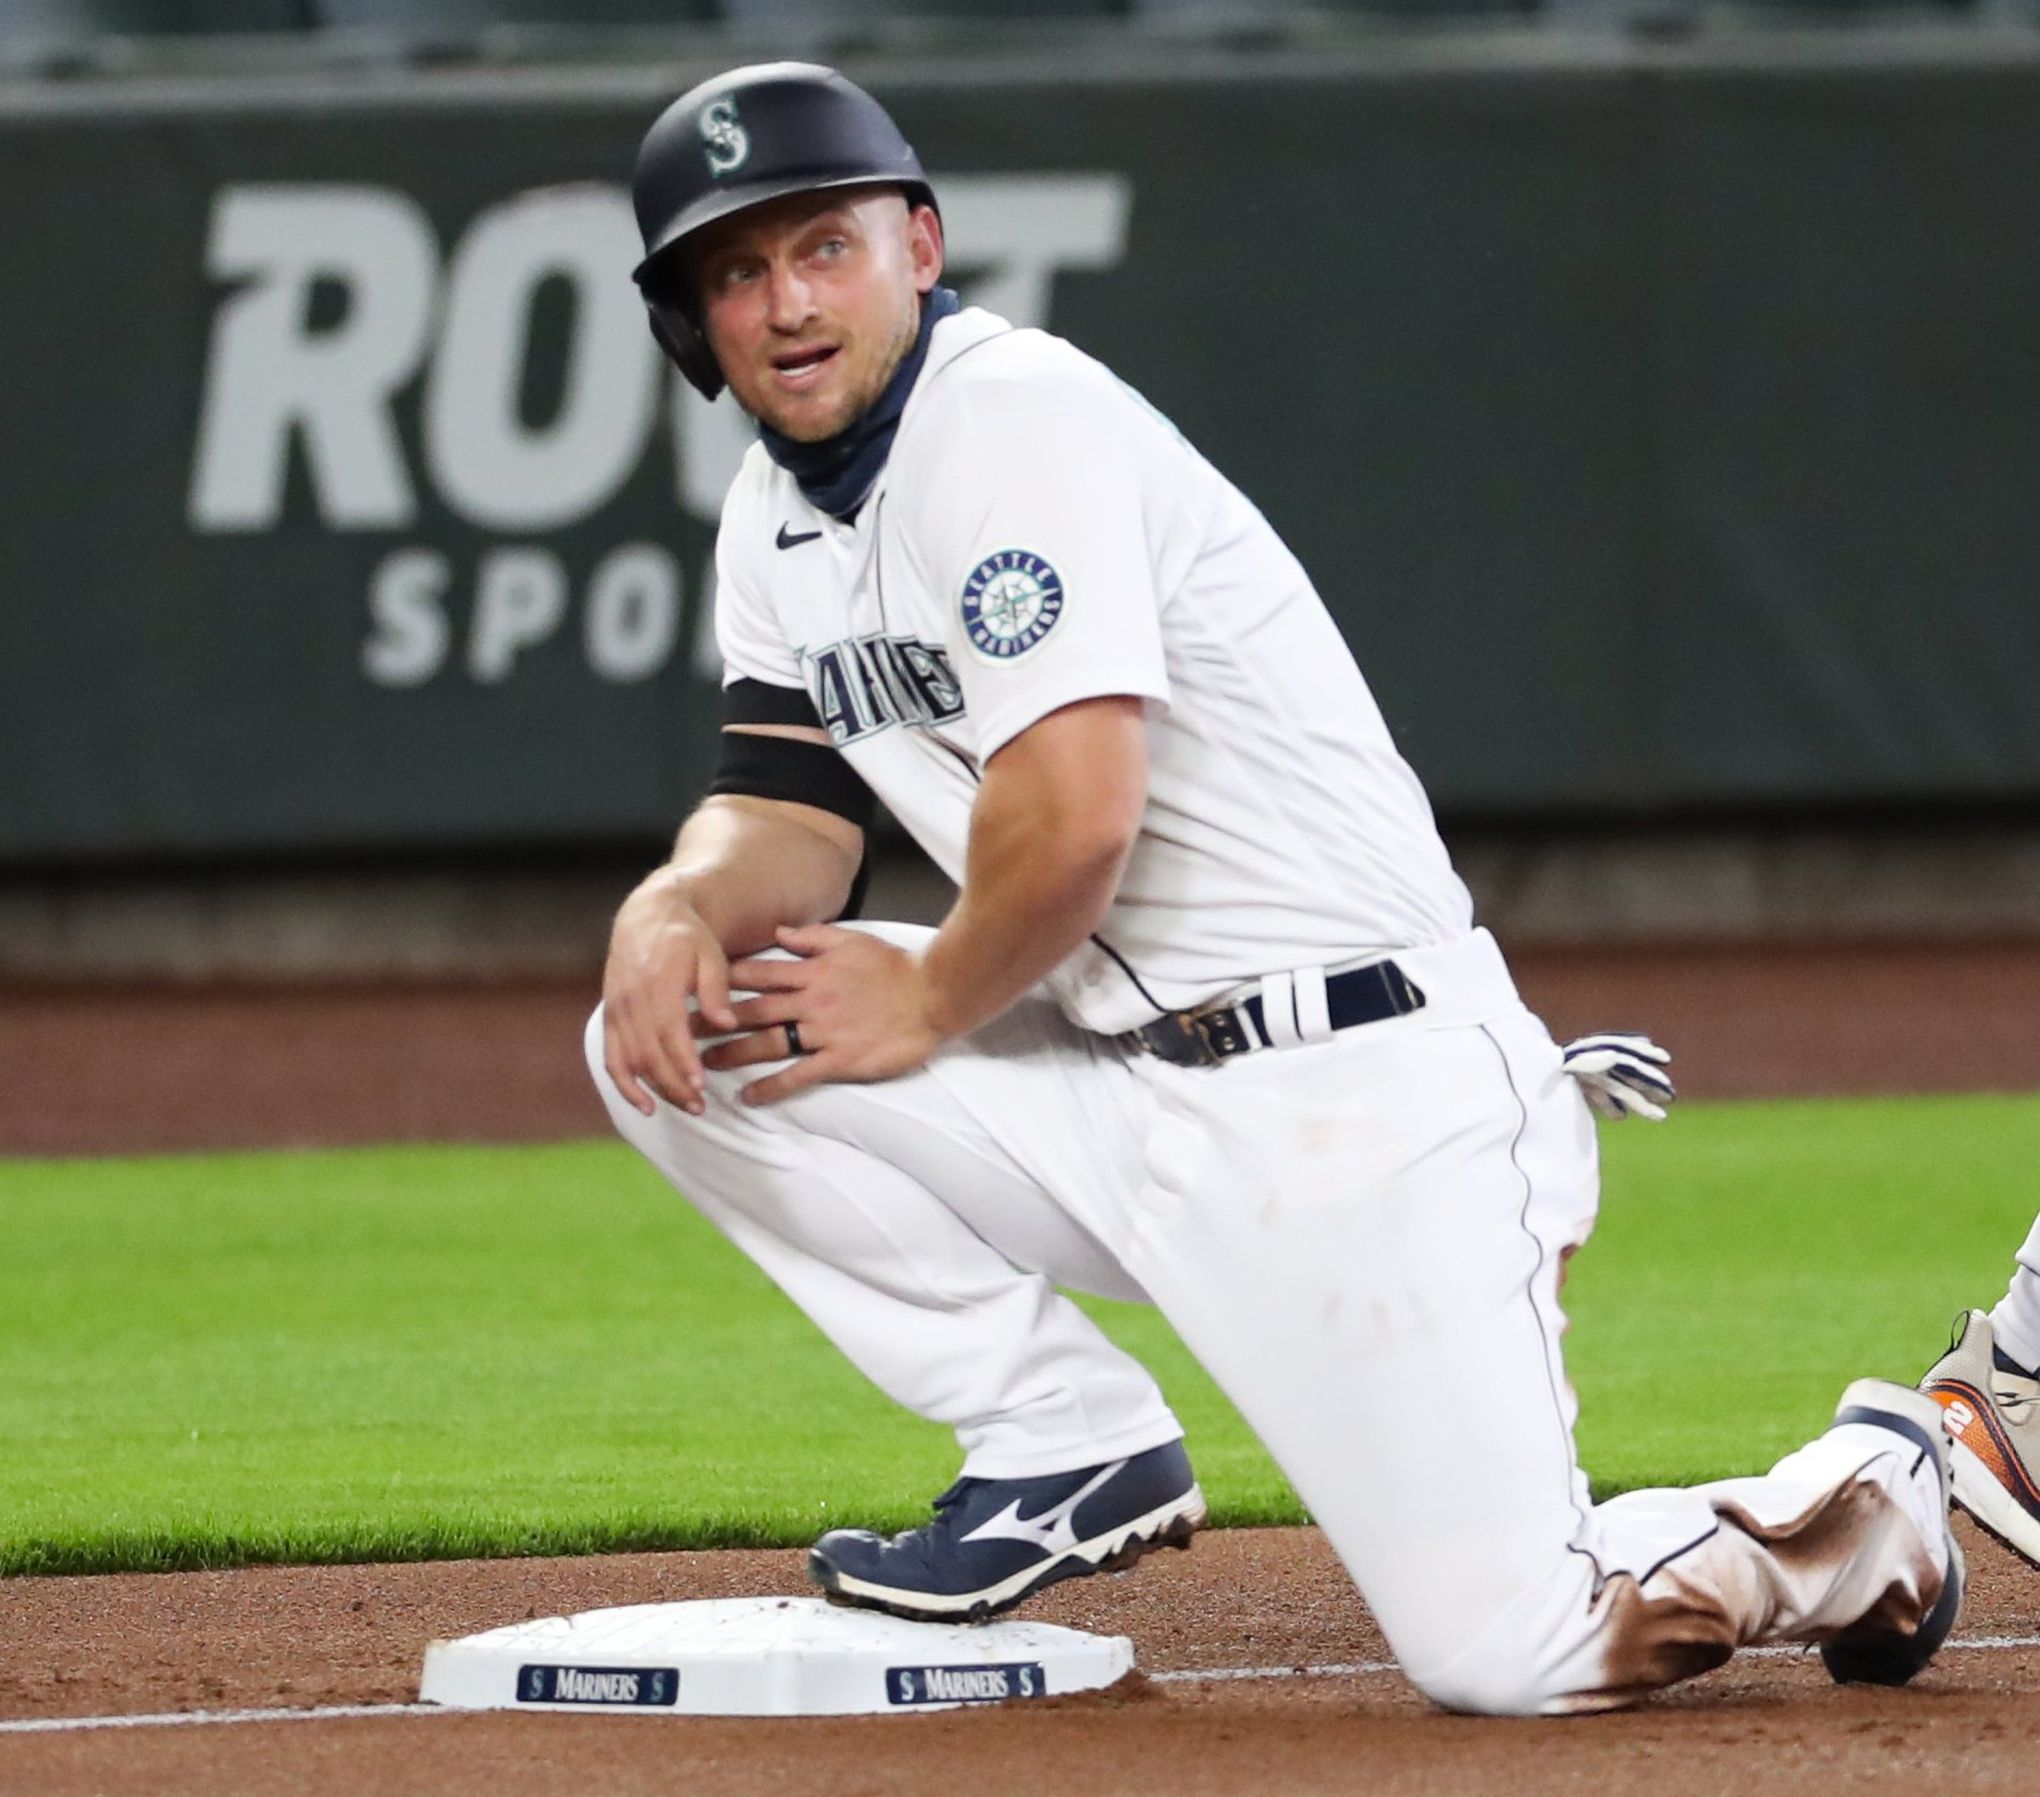 When the Mariners' 'step back' rebuilding plan hits its peak, will